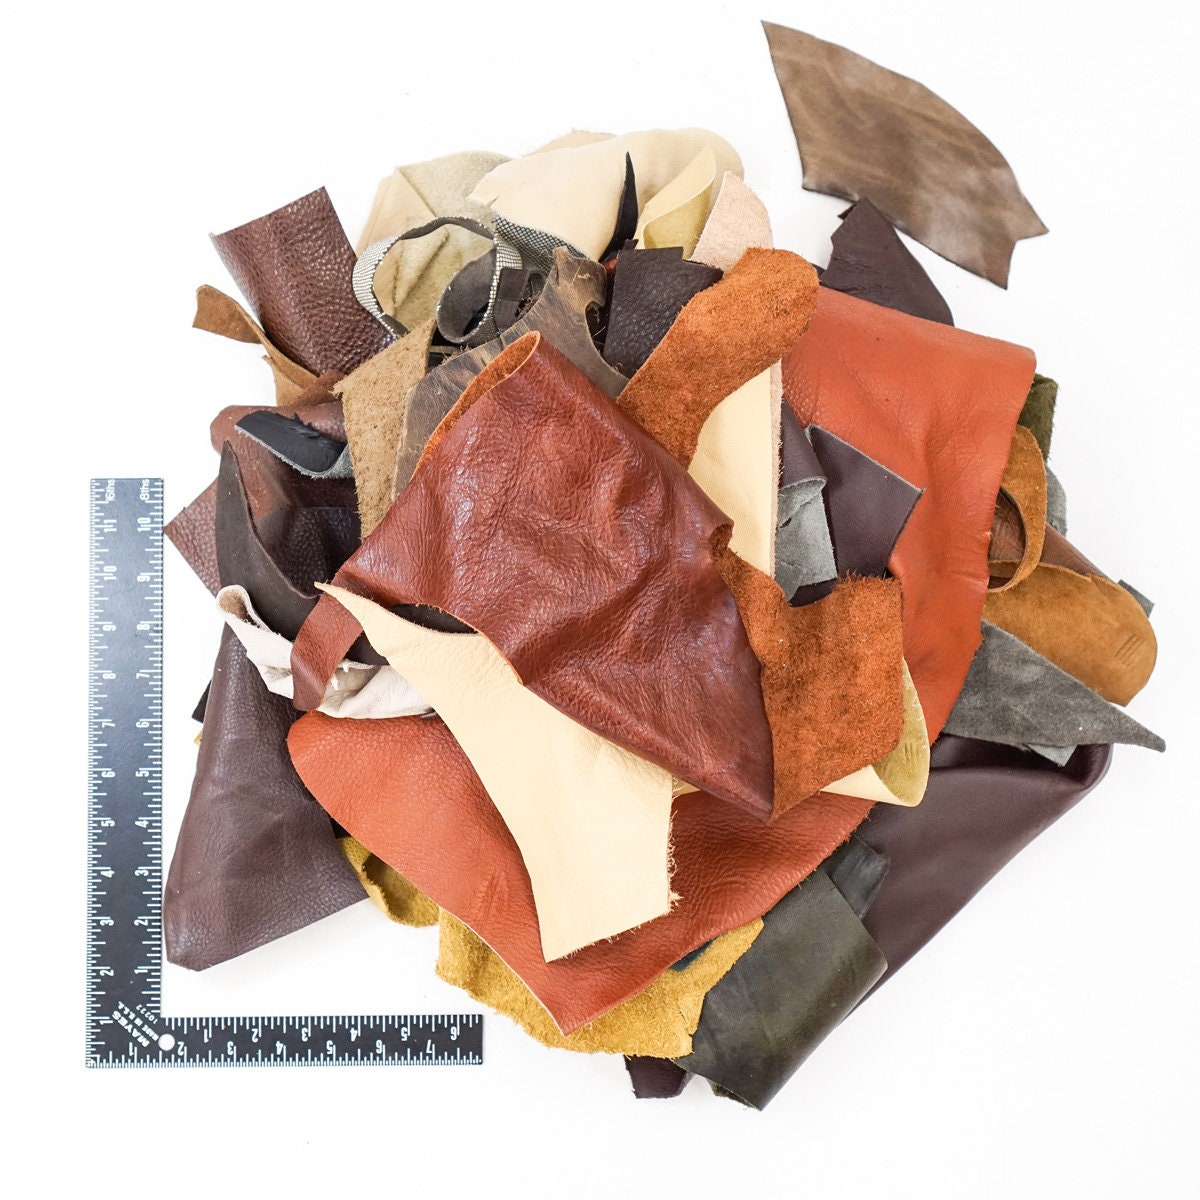 13 Pounds plus of thin (2 to 5 oz) Assorted Upholstery Leather Scraps.